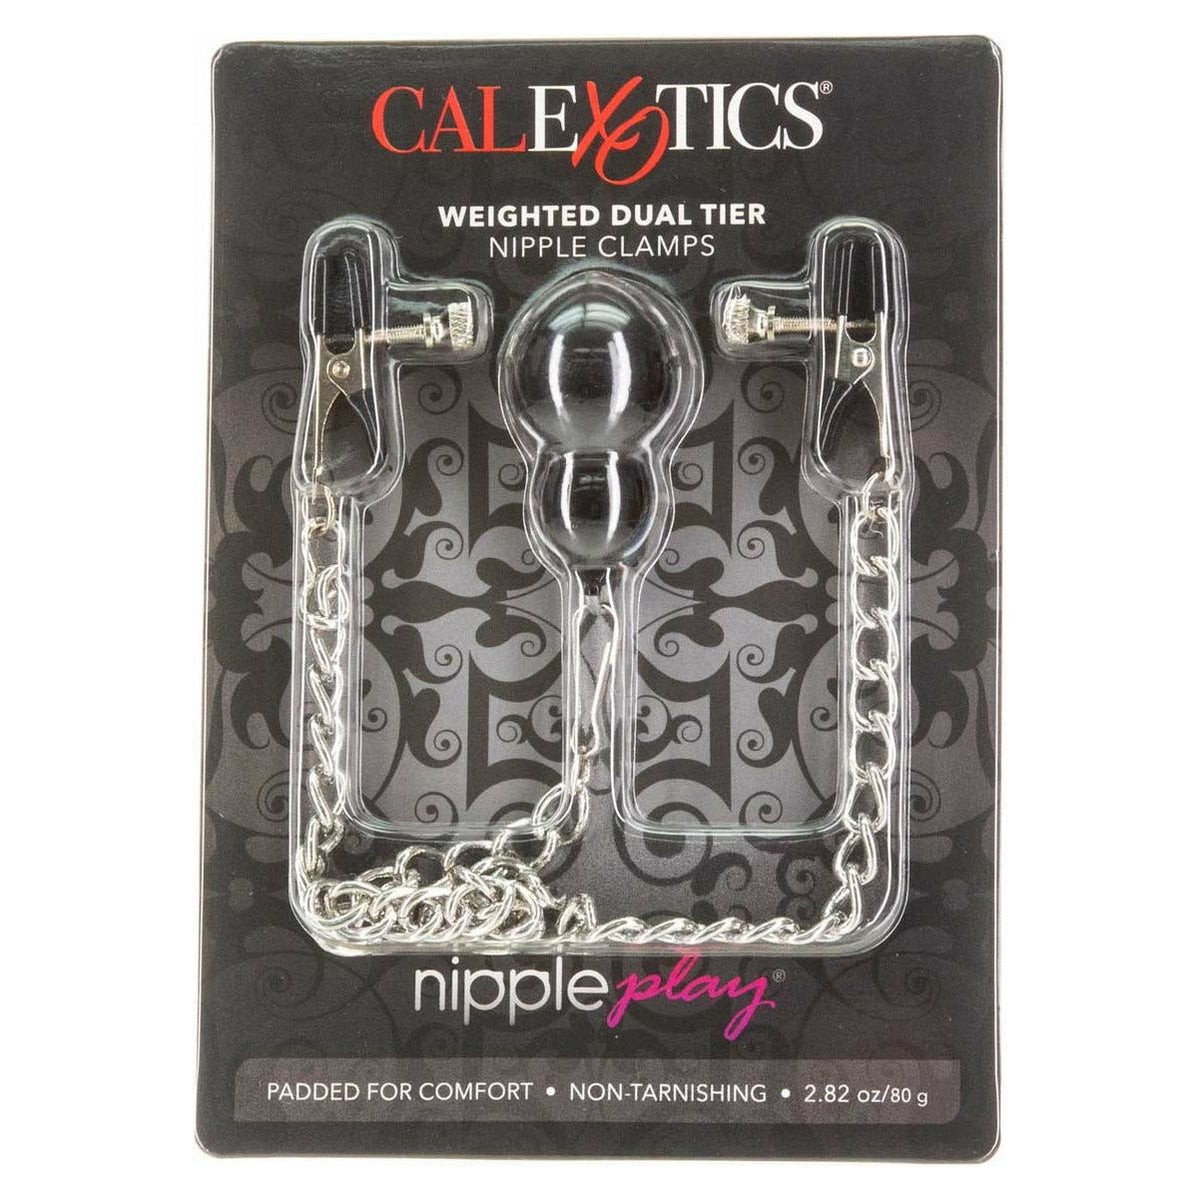 CalExotics Nipple Play - Weighted Dual Tier Nipple Clamps